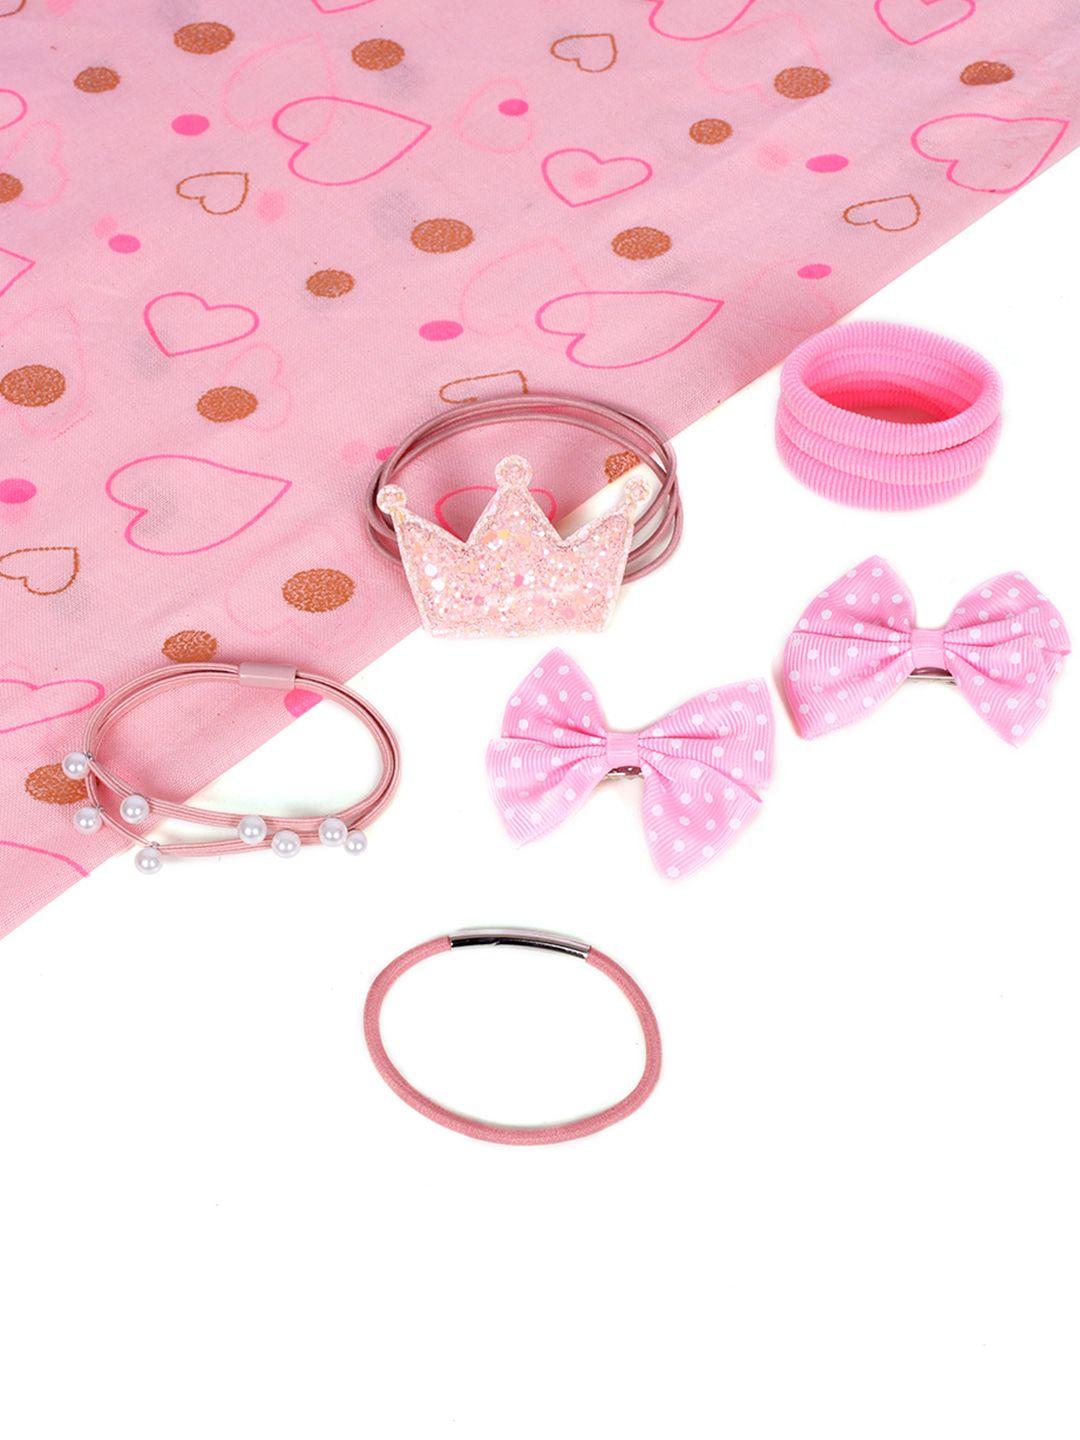 lil'-star-pink-embellished-hair-accessory-set